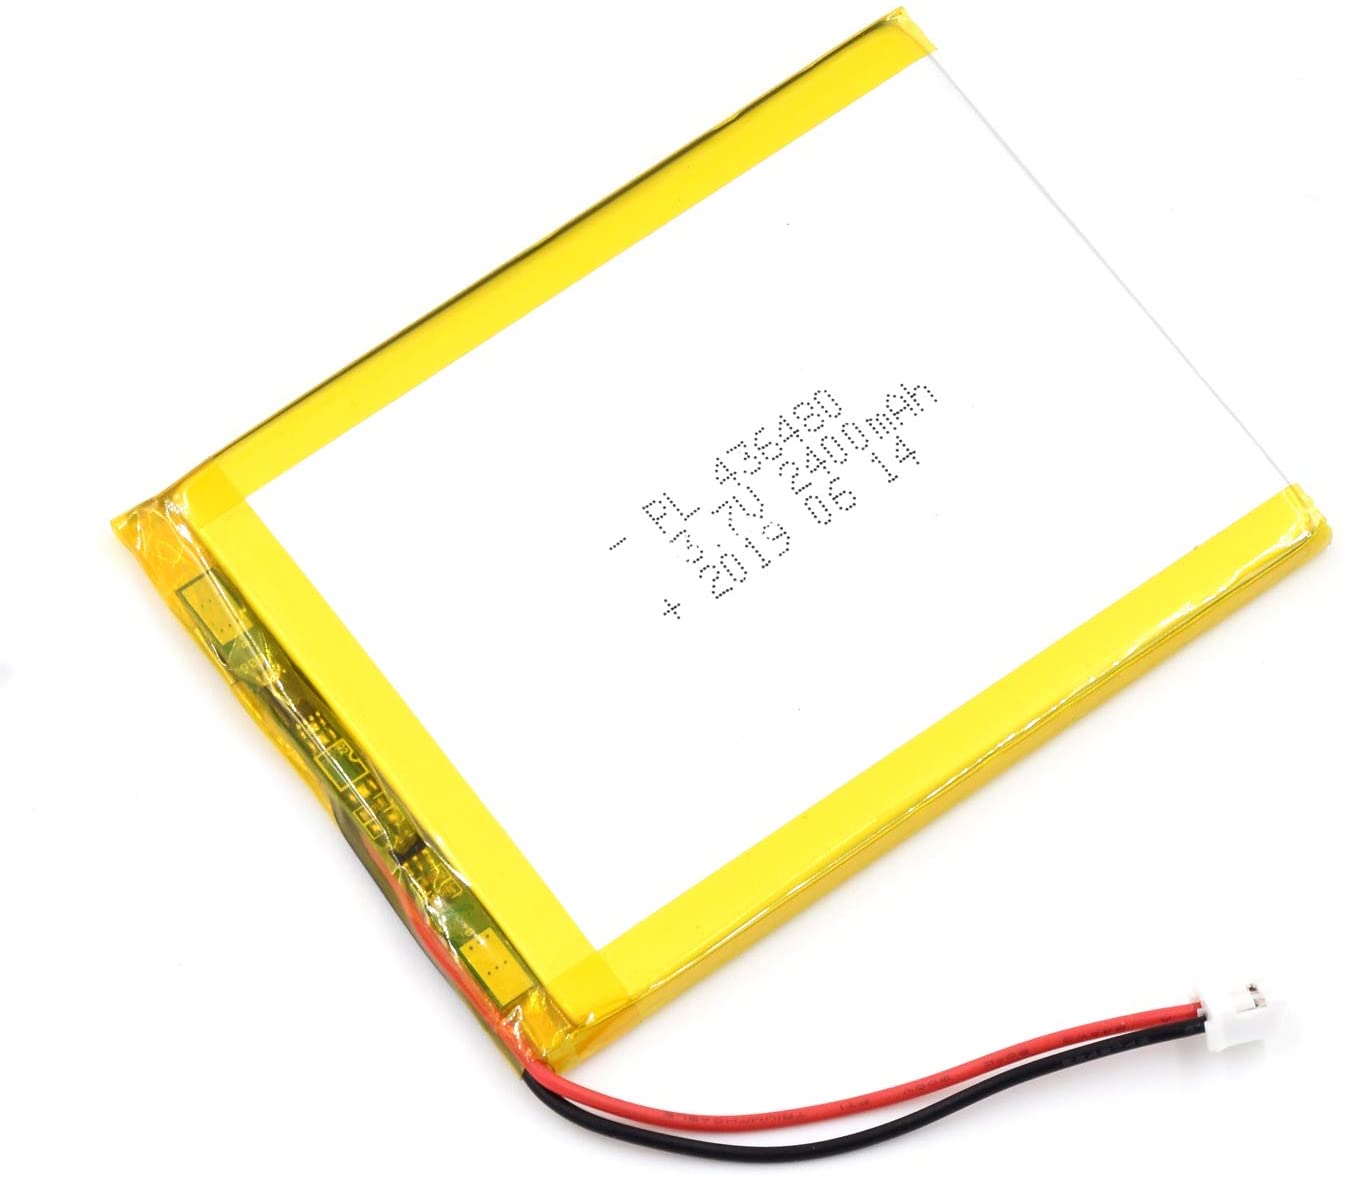 YDL 3.7V 2400mAh 436480 Rechargeable Polymer Lithium-Ion Battery Length 82mm